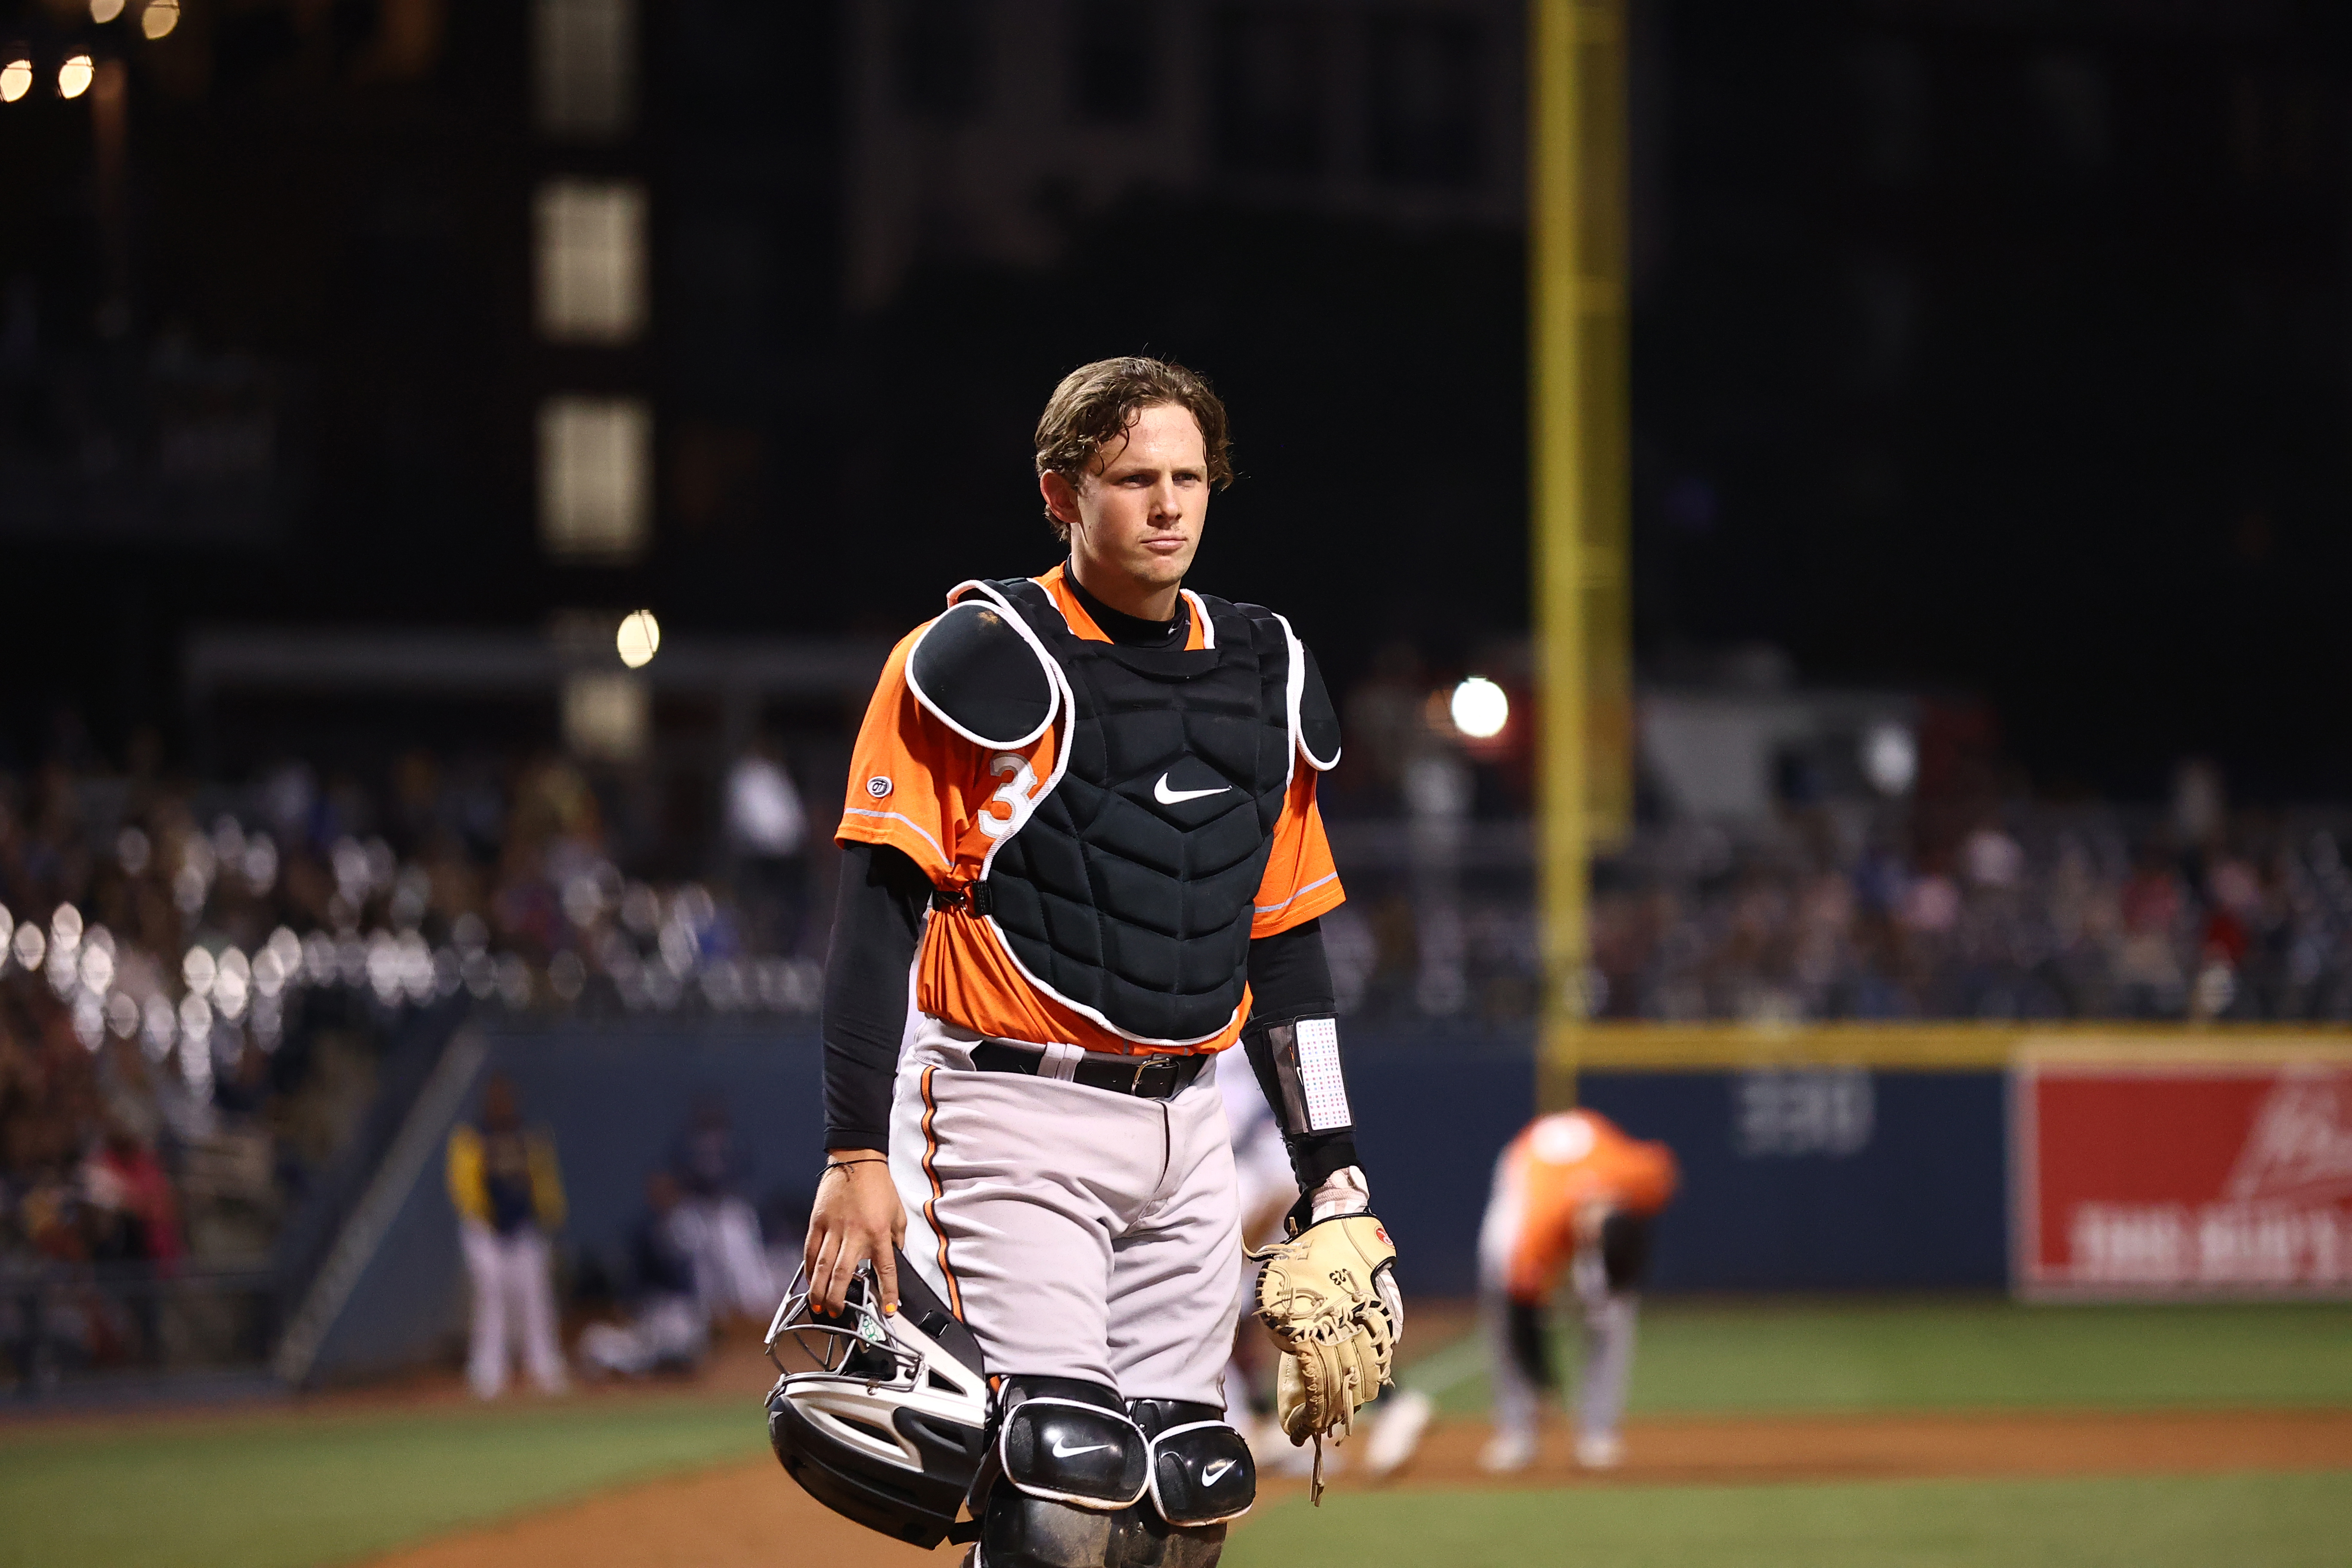 Adley Rutschman Baltimore Orioles Unsigned MLB Debut Catching Photograph